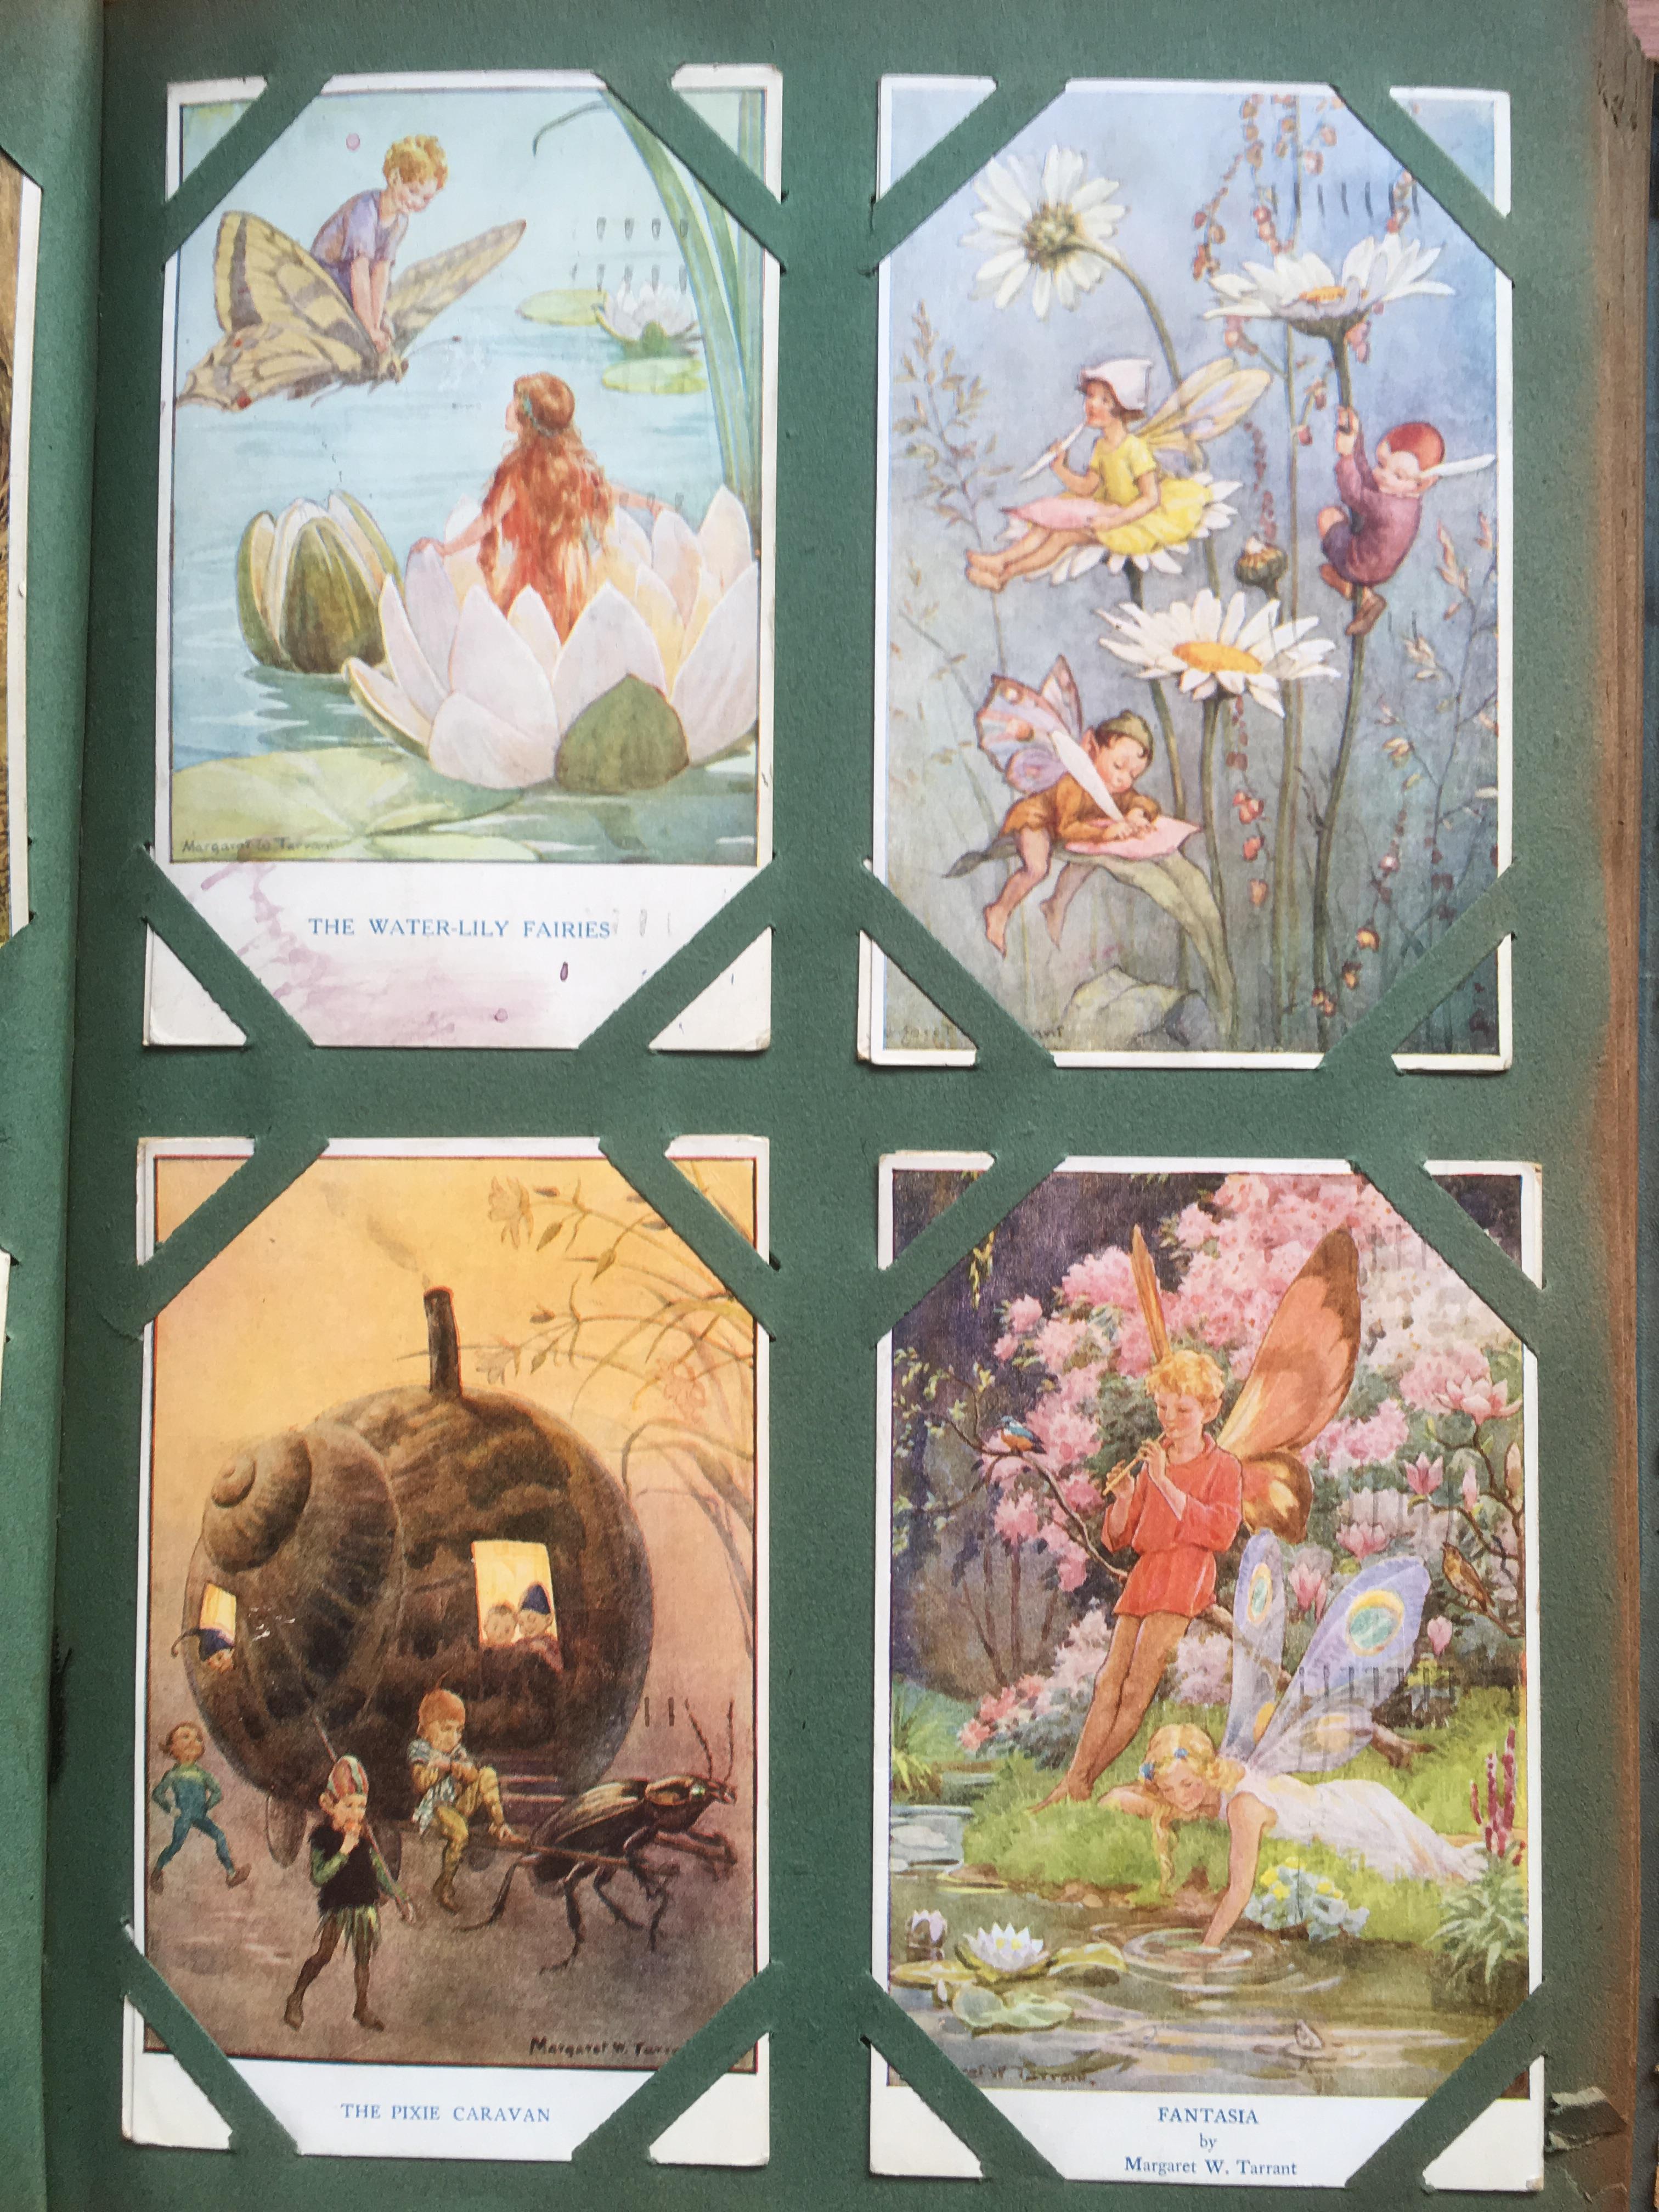 CORNER SLOT ALBUM WITH CHILDREN RELATED POSTCARDS, FAIRIES INCLUDING OUTHWAITE, CLOKE, TARRANT, - Image 4 of 7